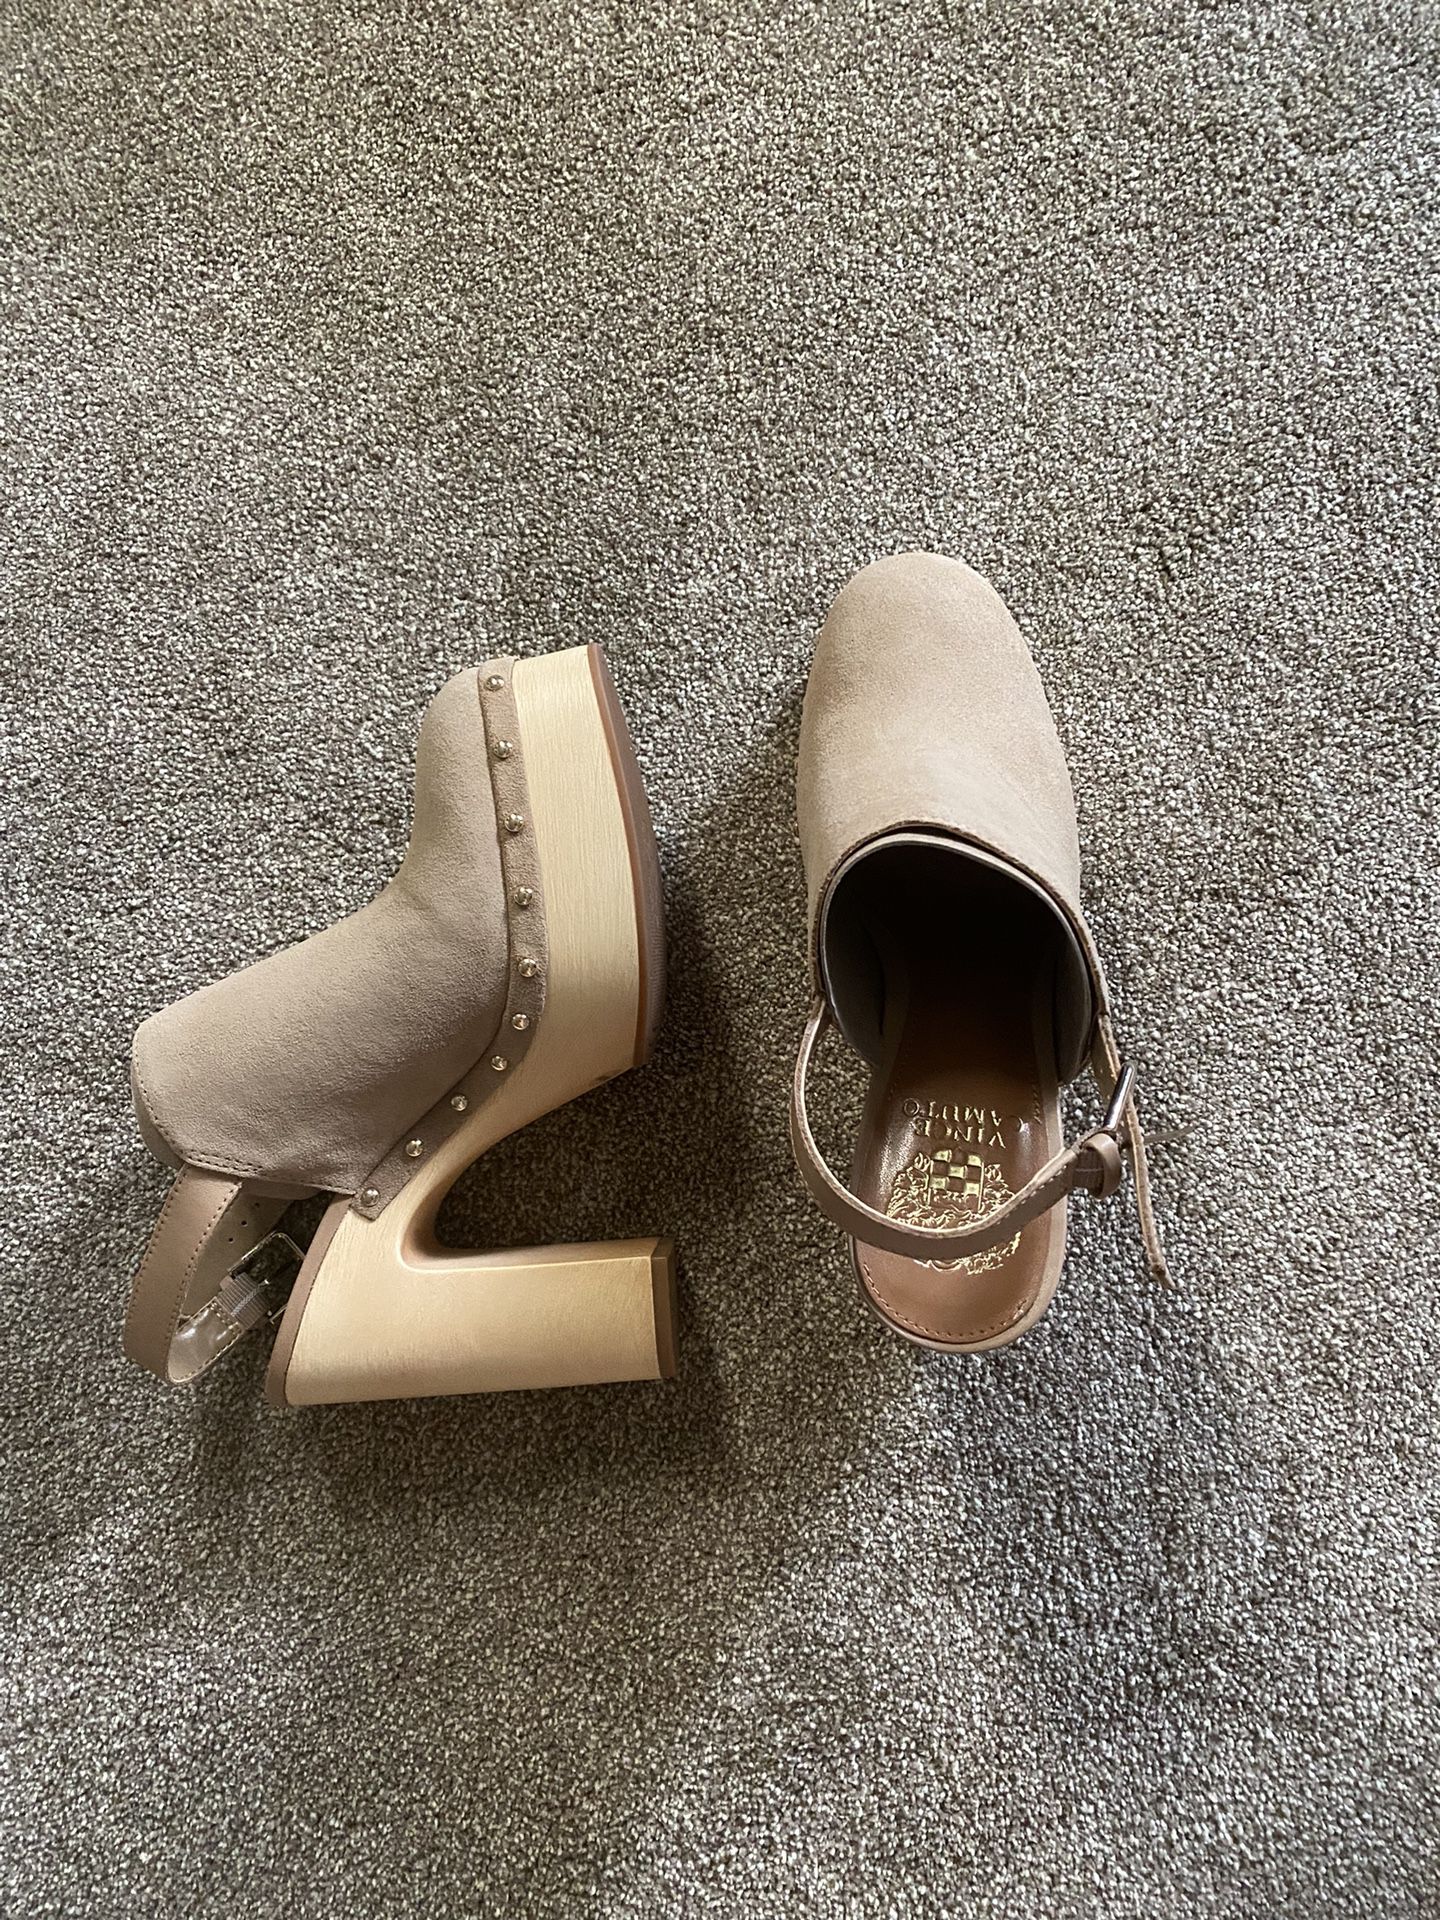 vince camuto heels new size 9 $40 OFF